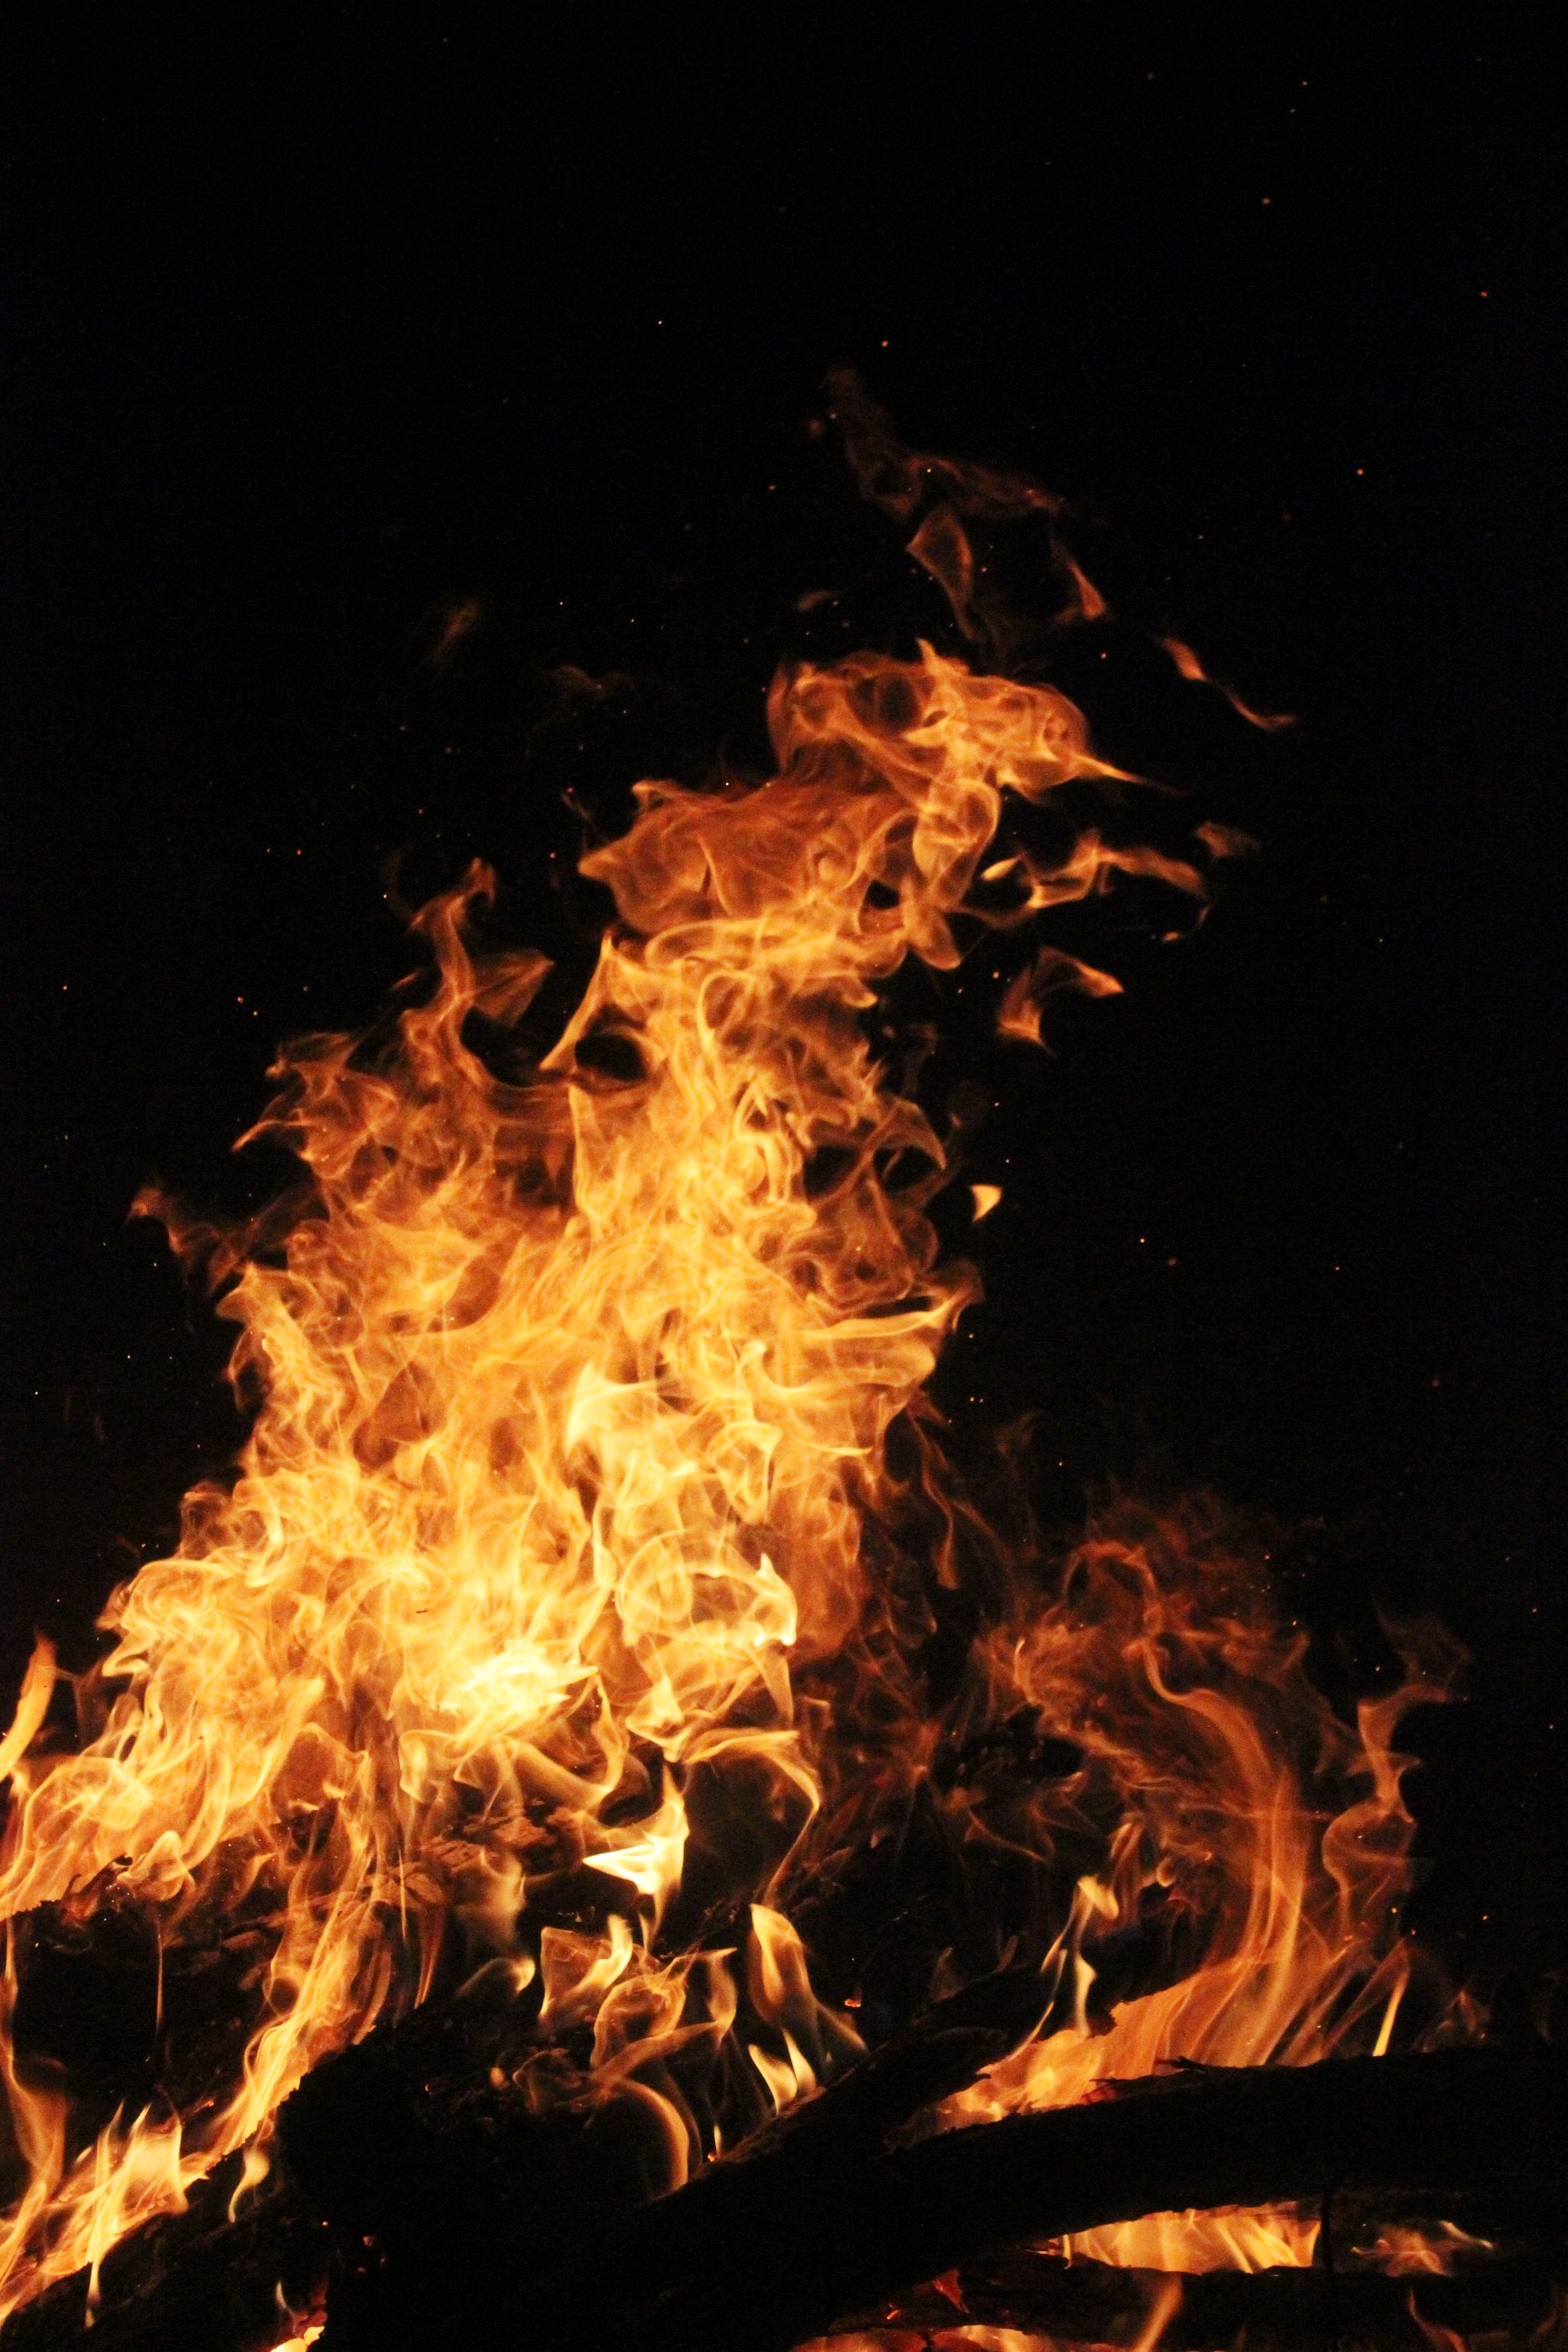 The Bonfire, Night, Sparks, Flame, Wood, heat - temperature, flame